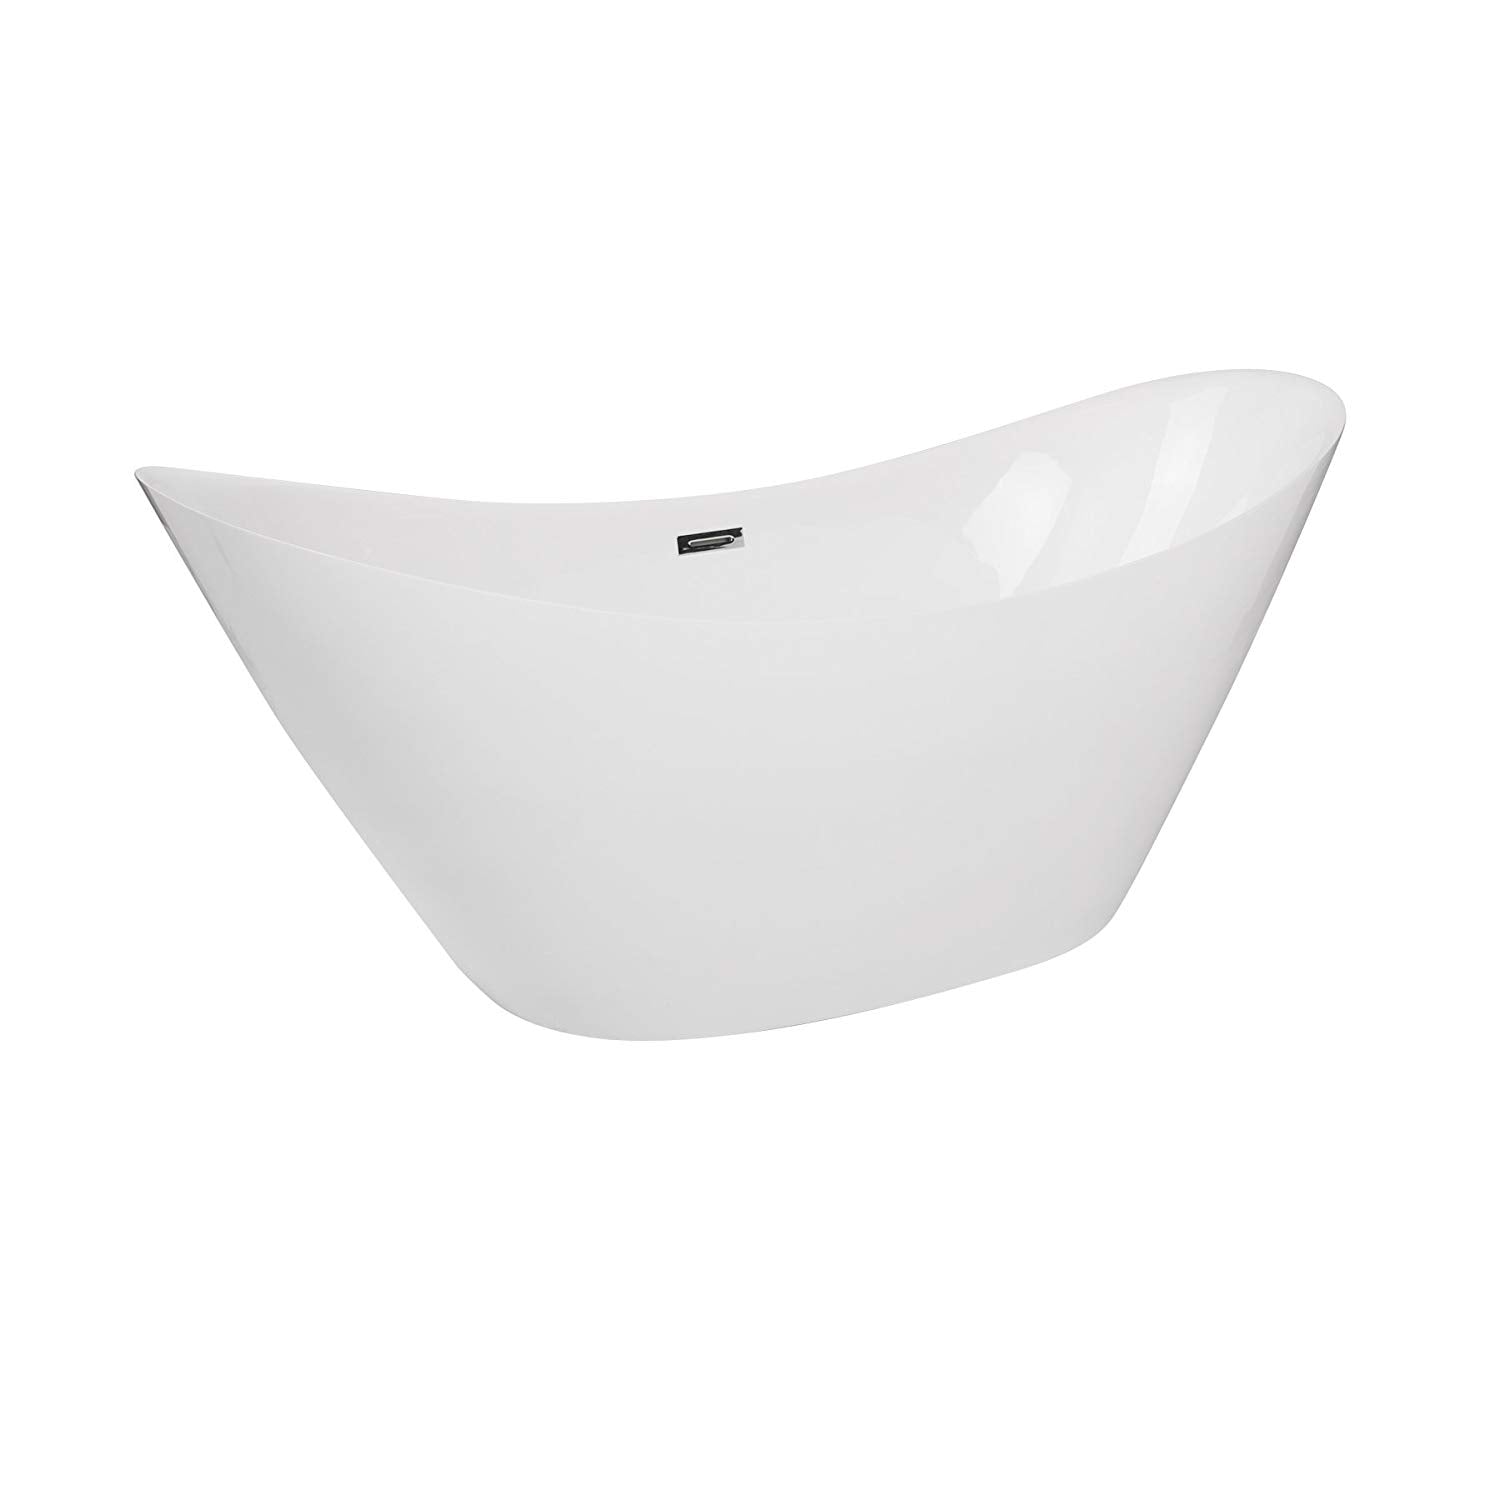 MAYKKE Bel 67" Modern Oval Acrylic Bathtub Double Slipper Sloped Easy to Install Freestanding White Soaker Tubs for Bathroom, Shower cUPC certified, Drain & Overflow Assembly Included